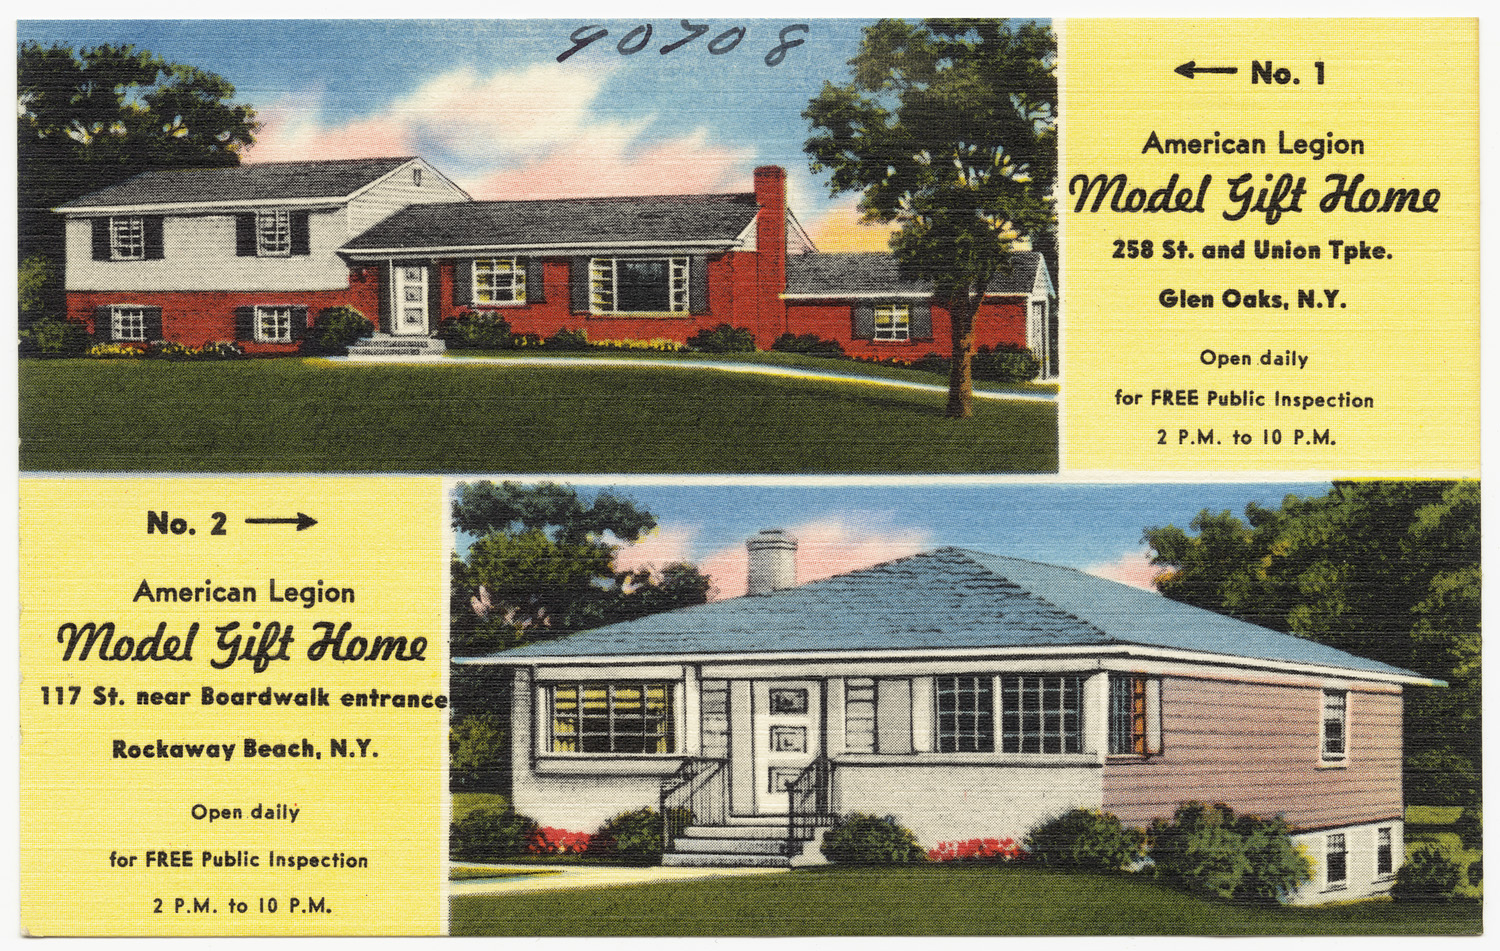 two pictures of some small houses with porches